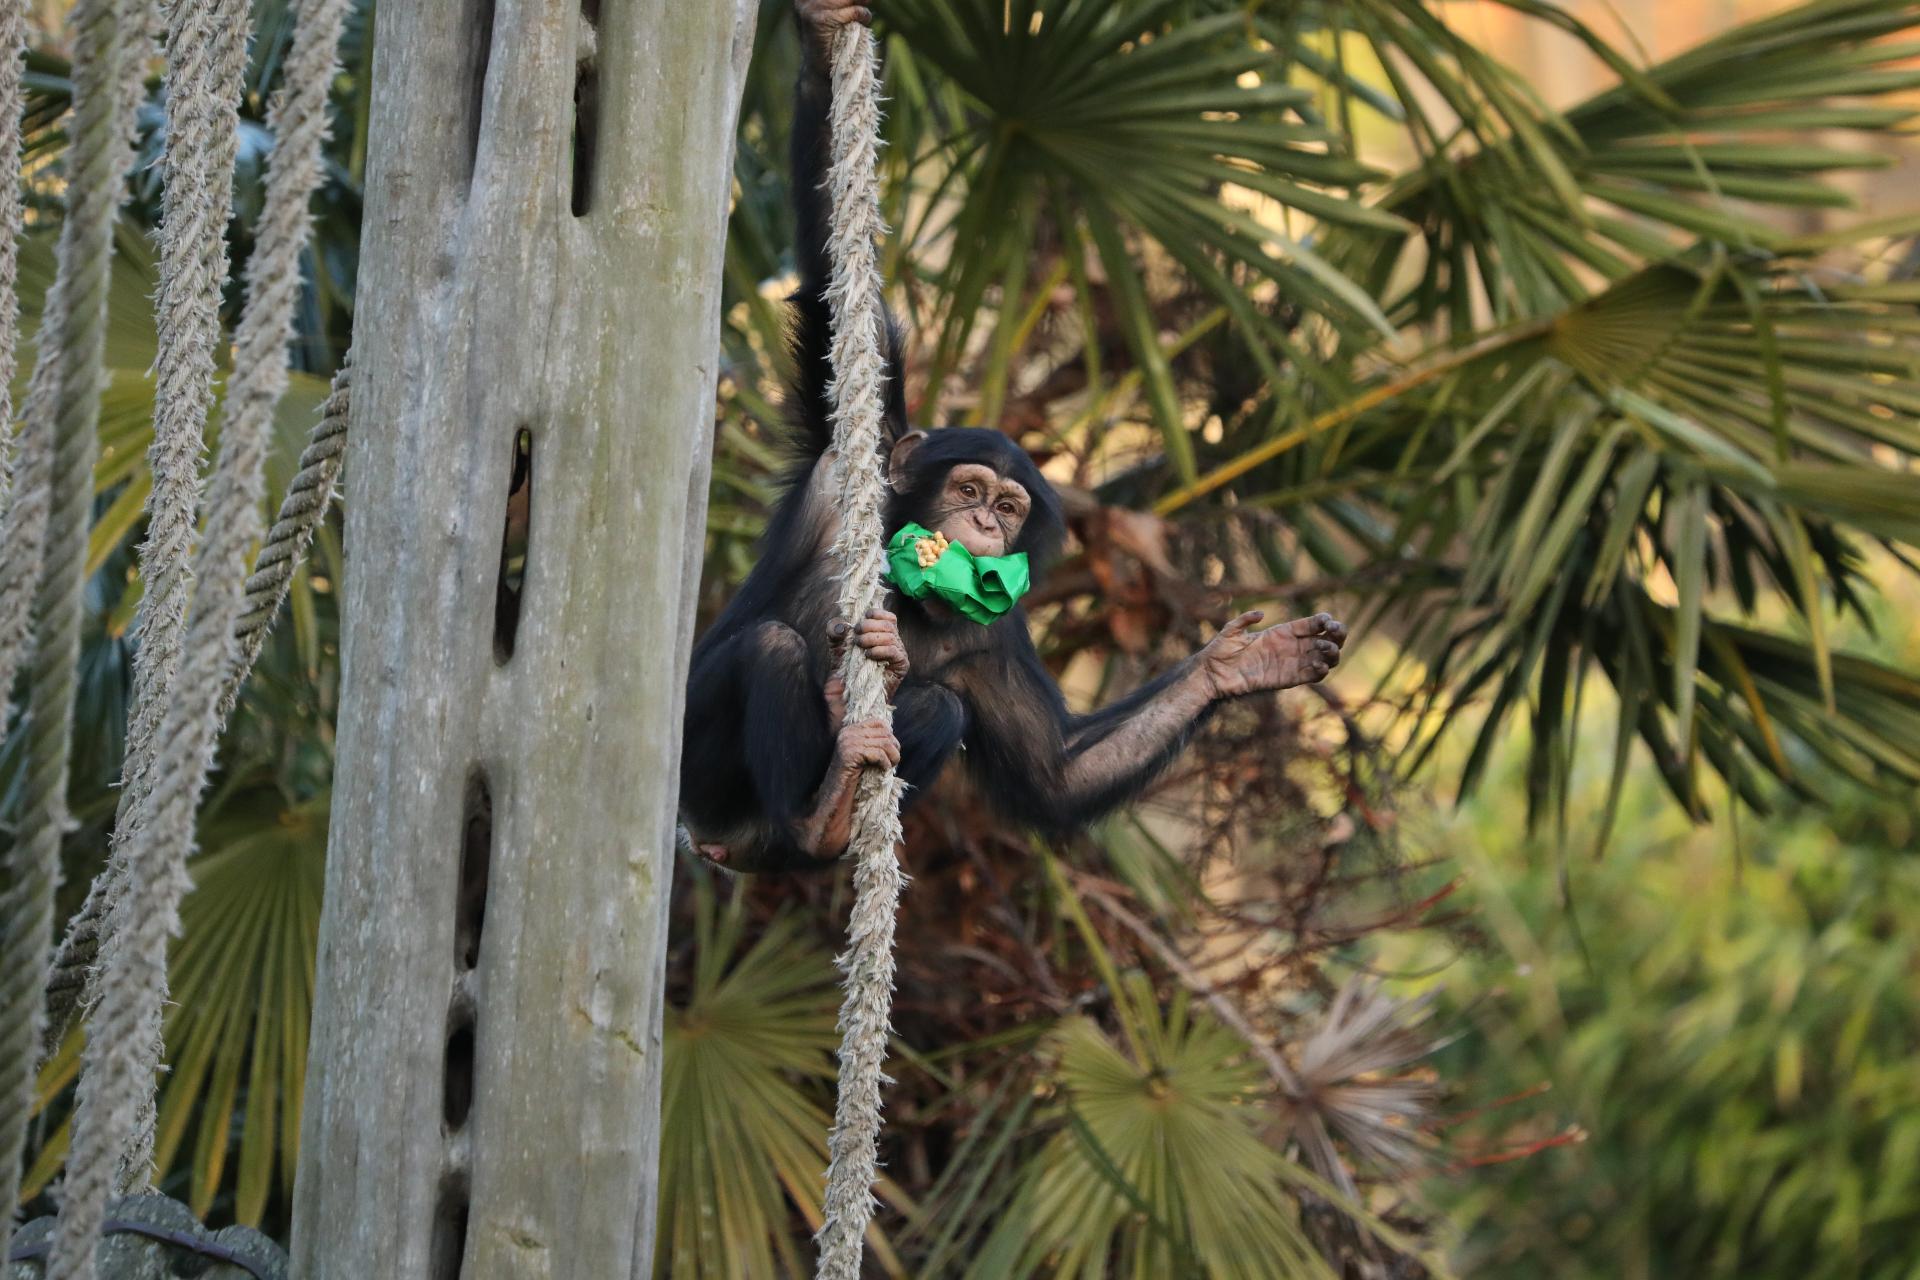 Masindi chimpanzee hanging from rope with enrichment in mouth

IMAGE: Rhiordan Langan-Fortune (2024)